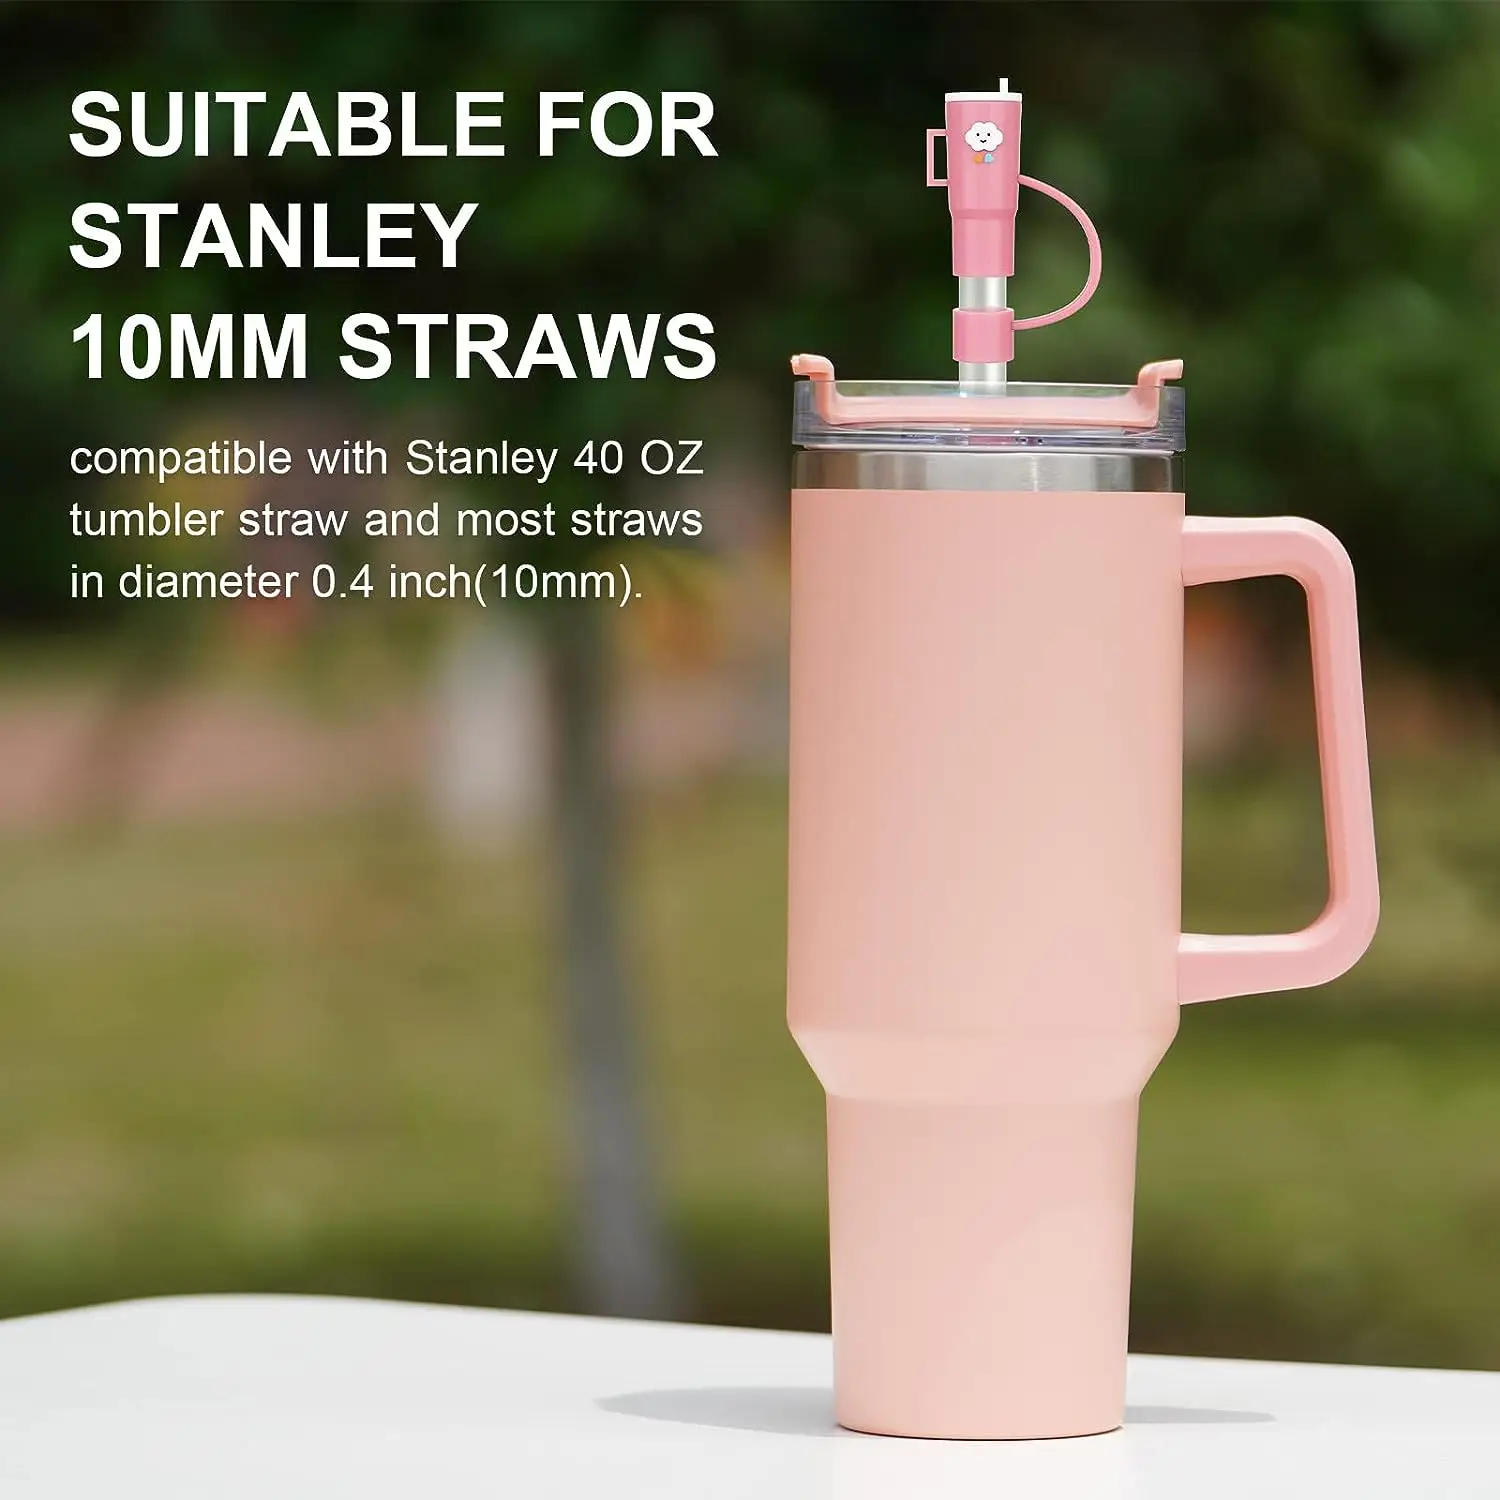 https://ae01.alicdn.com/kf/S2601c0a08f91456188fedeceb8c1ba06S/Cute-Silicone-Straw-Covers-Cap-for-Stanley-Cup-Dust-Proof-Drinking-Straw-Reusable-Straw.jpg